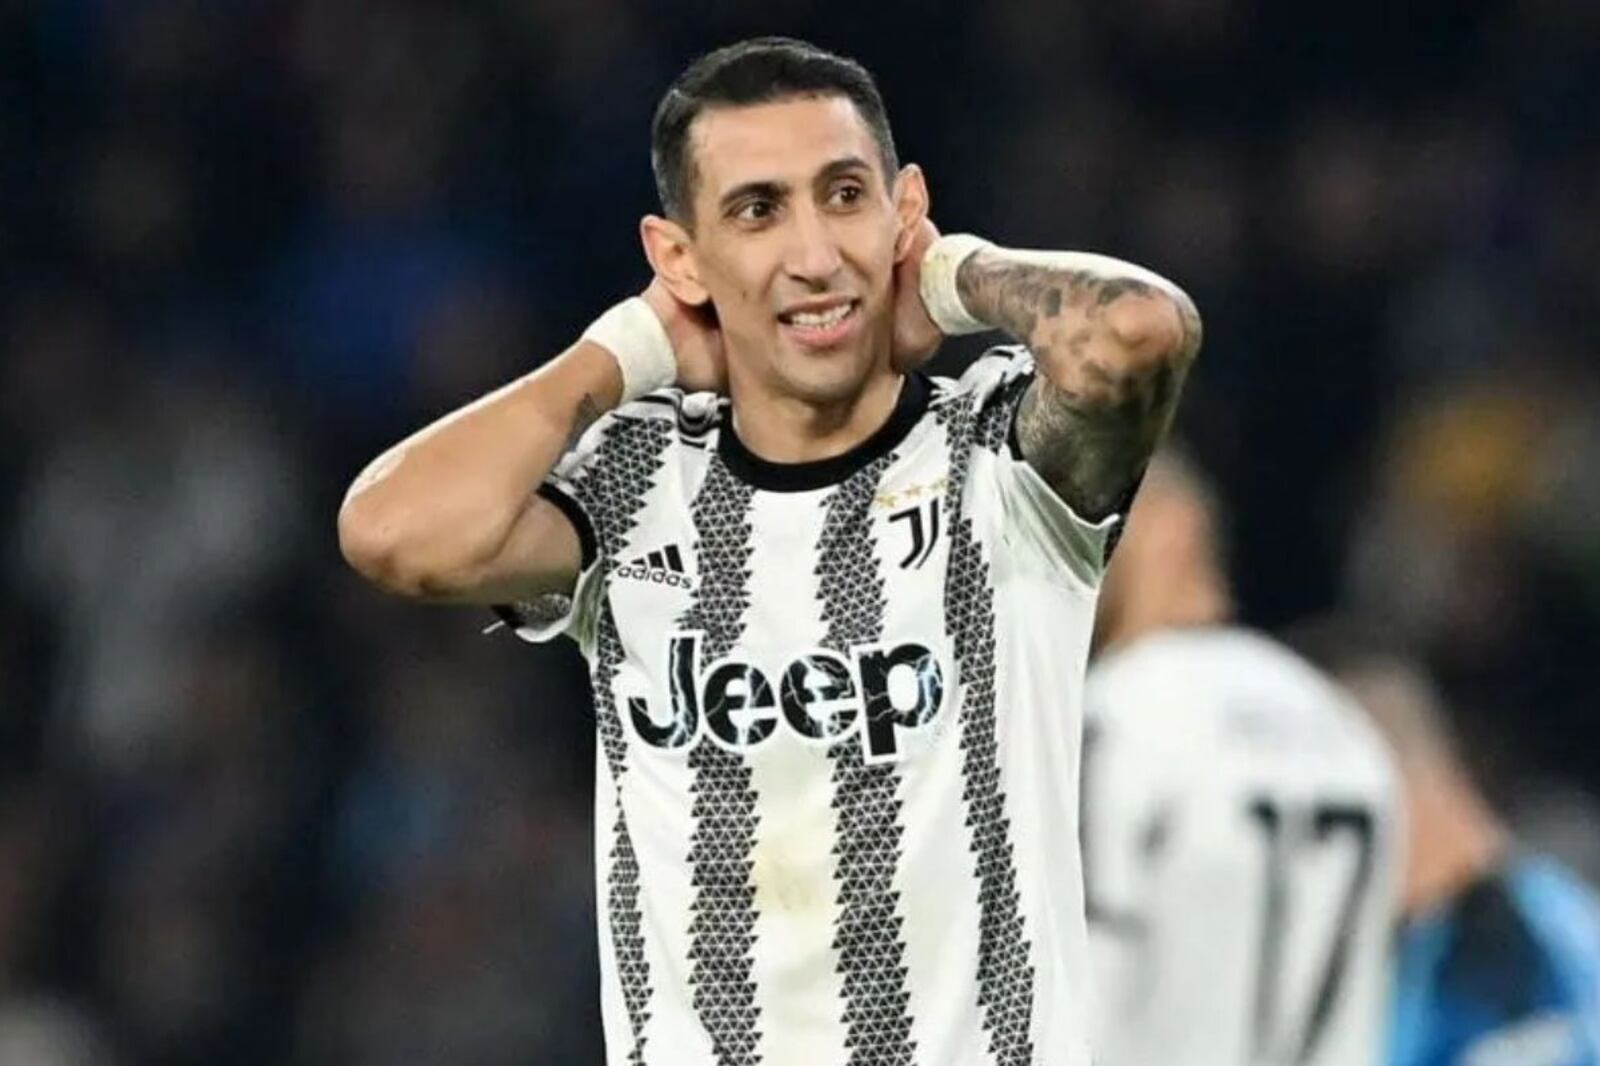 He will leave Juventus, Di Maria and his decision to return to Premier League